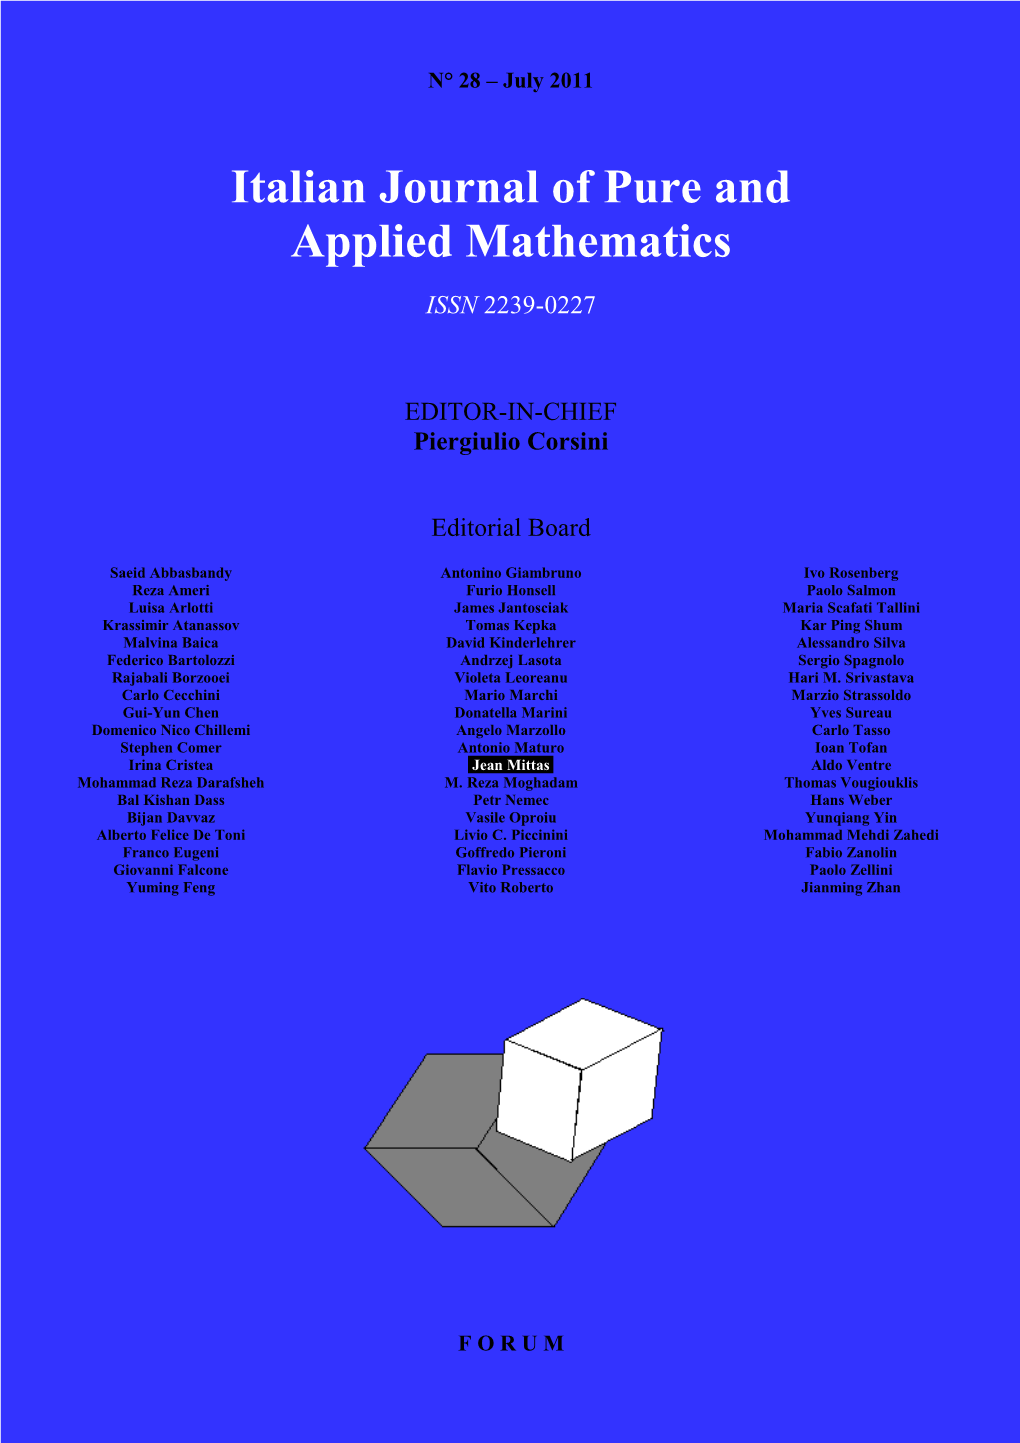 Italian Journal of Pure and Applied Mathematics ISSN 2239-0227